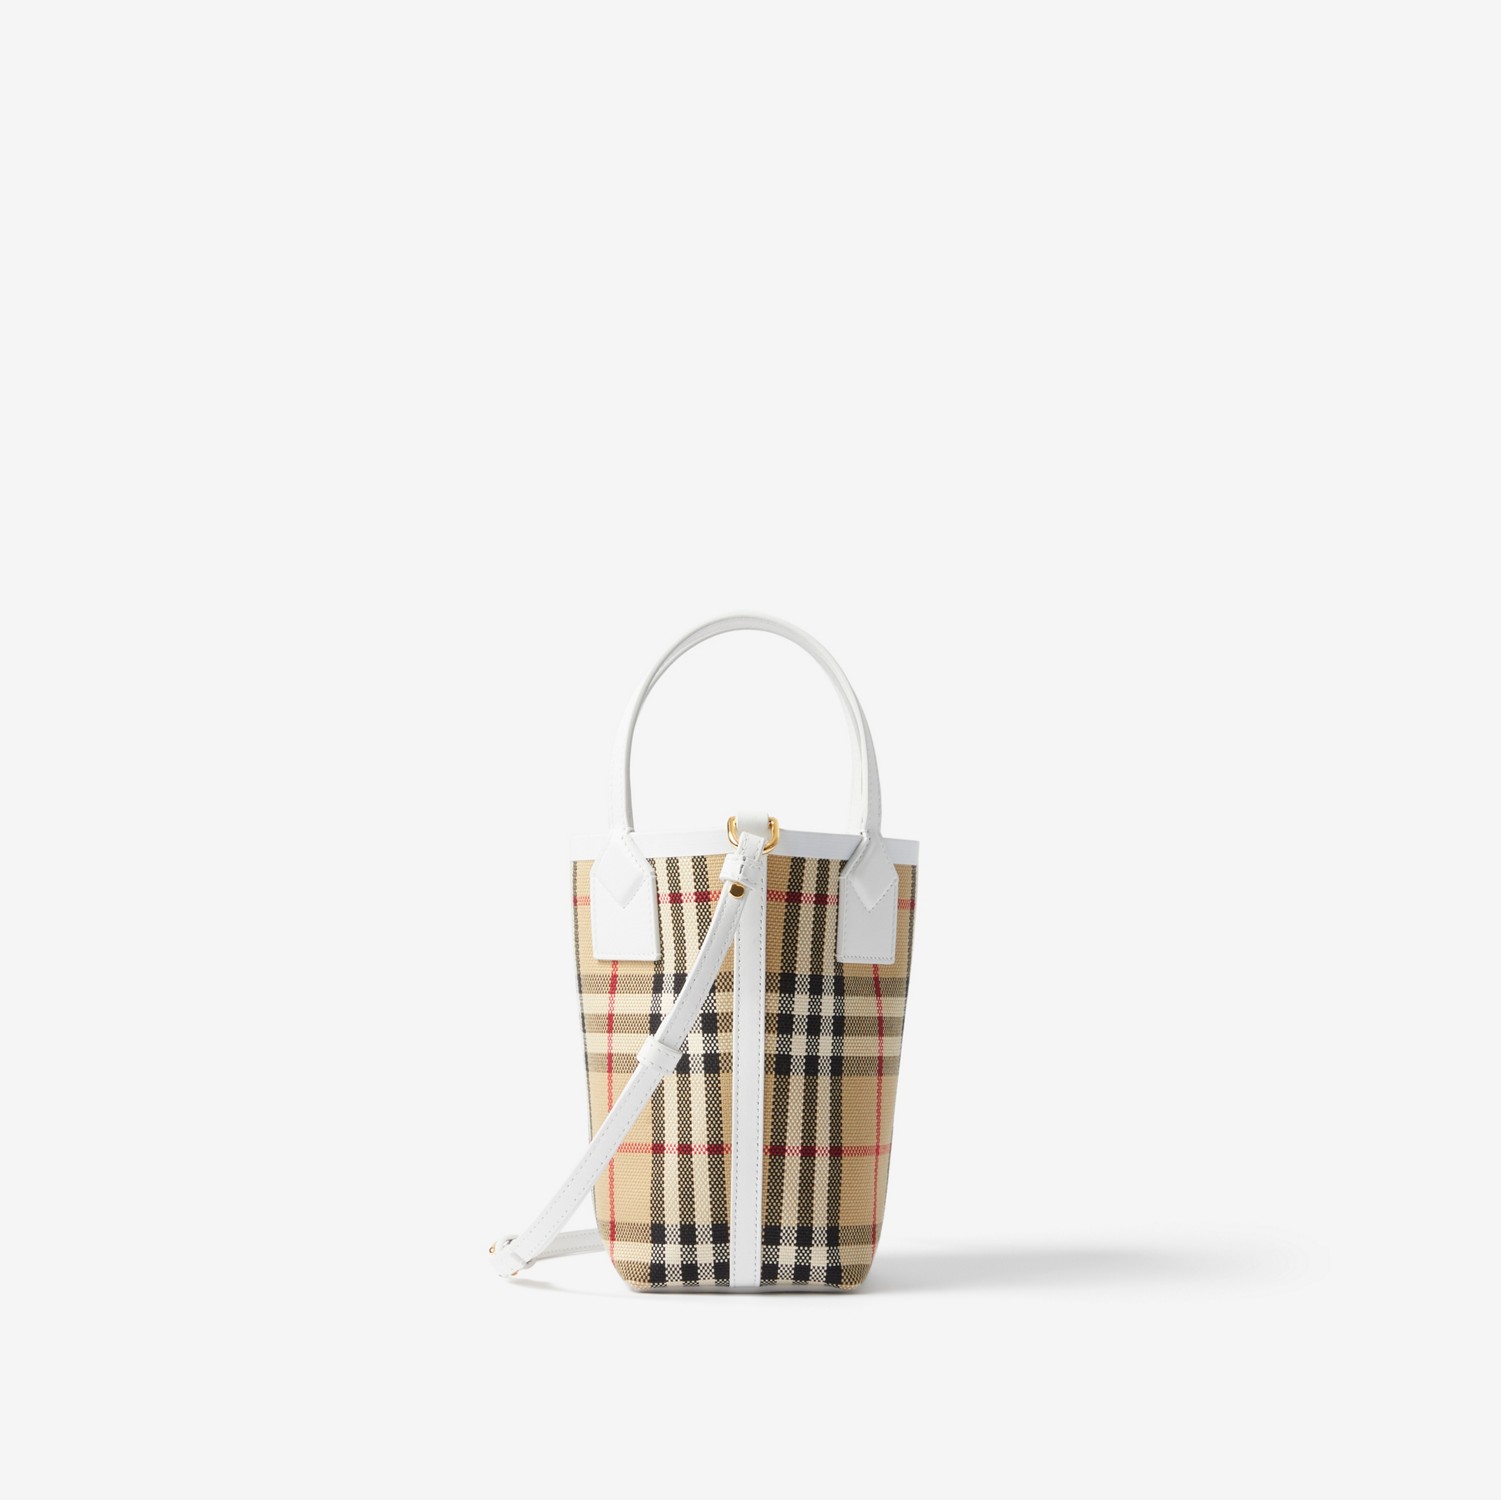 Minibolso tote London (Beige Vintage/blanco) - Mujer | Burberry® oficial